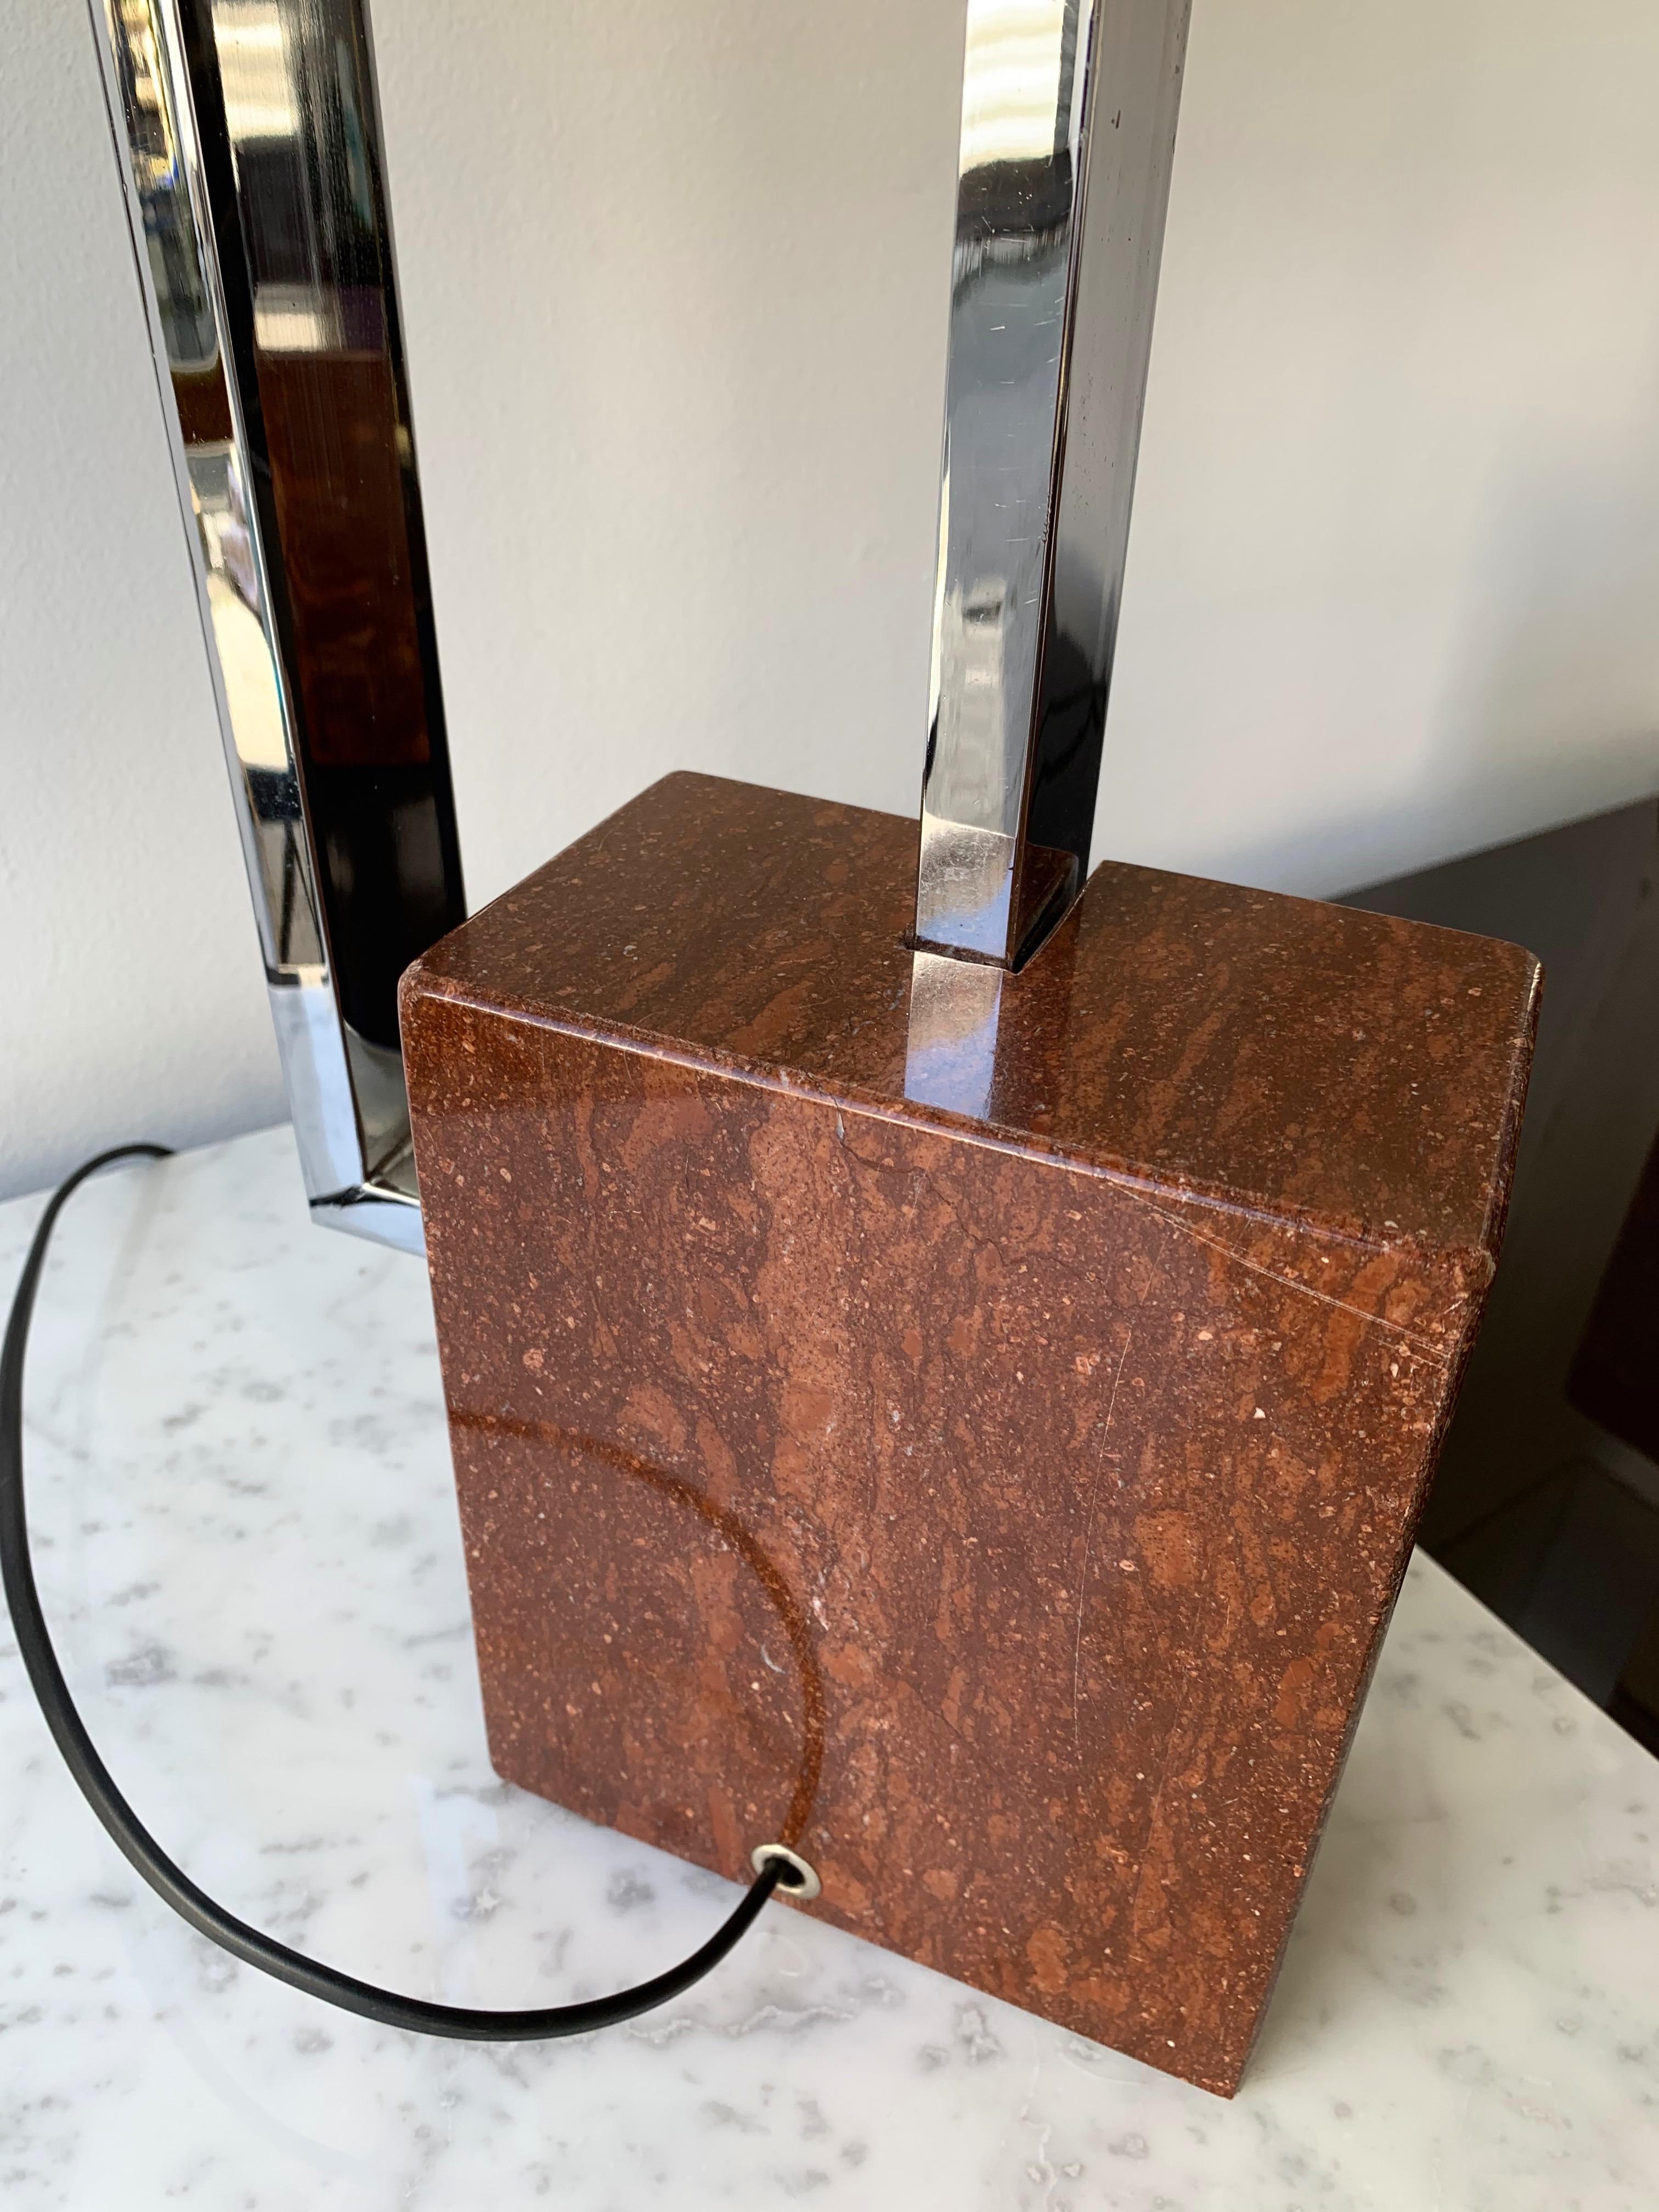 Geometrical pair of table or bedside lamps by the manufacture Banci Firenze. Red marble base and metal chrome.  Famous design like Sciolari, Reggiani, Willy Rizzo, Philippe Barbier, Lumi, Luci.

Demonstration shades not included. Measurements lamp